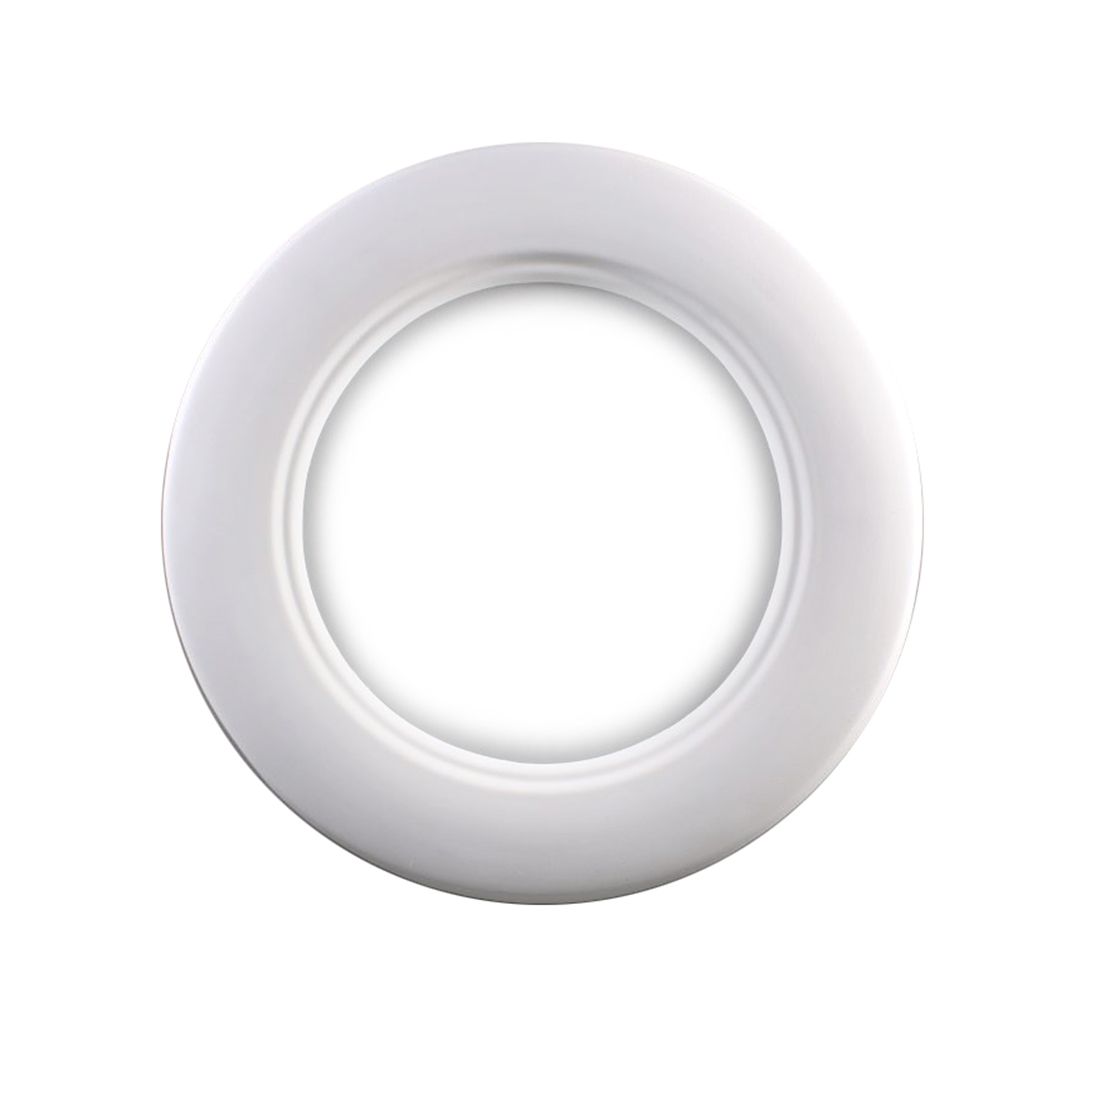 PLATE RING MOLD - 9" by CPI